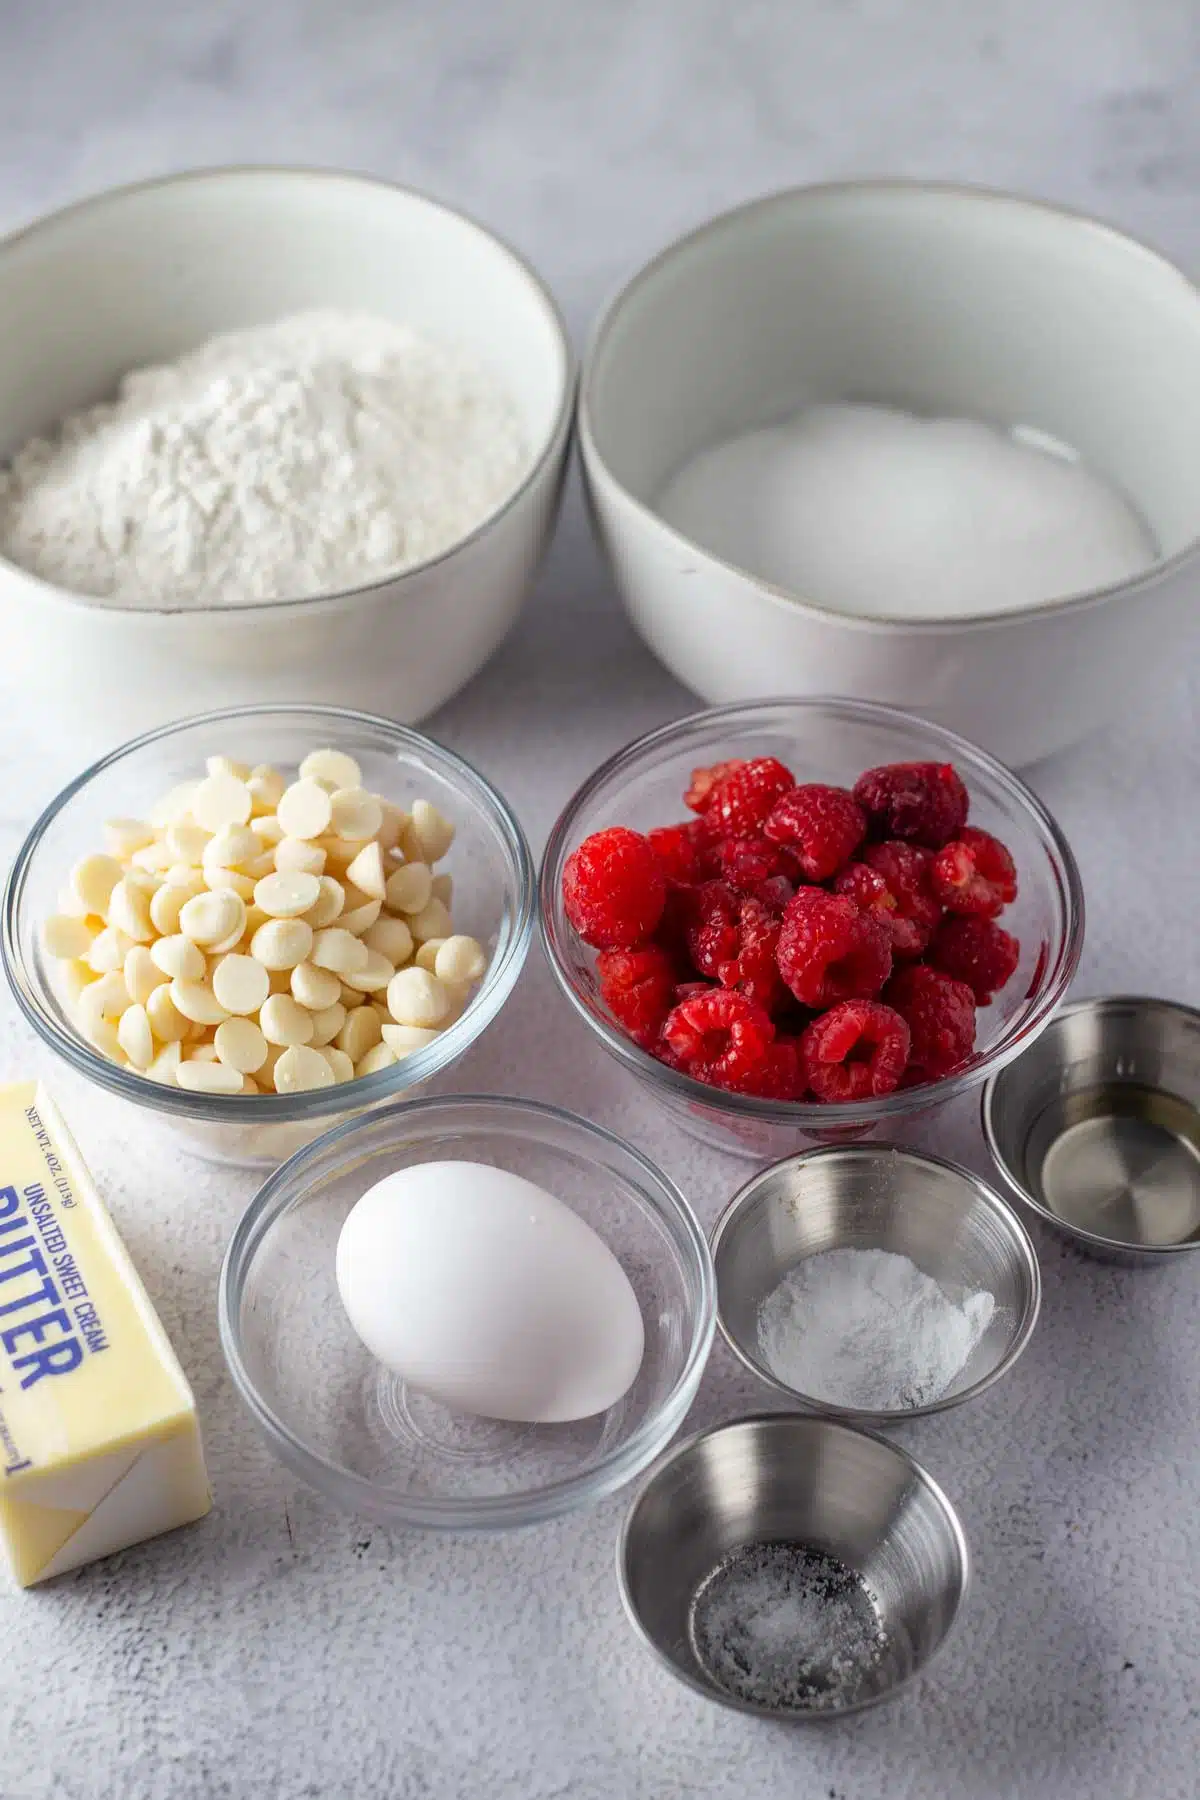 Tall image showing ingredients needed for raspberry white chocolate blondies.